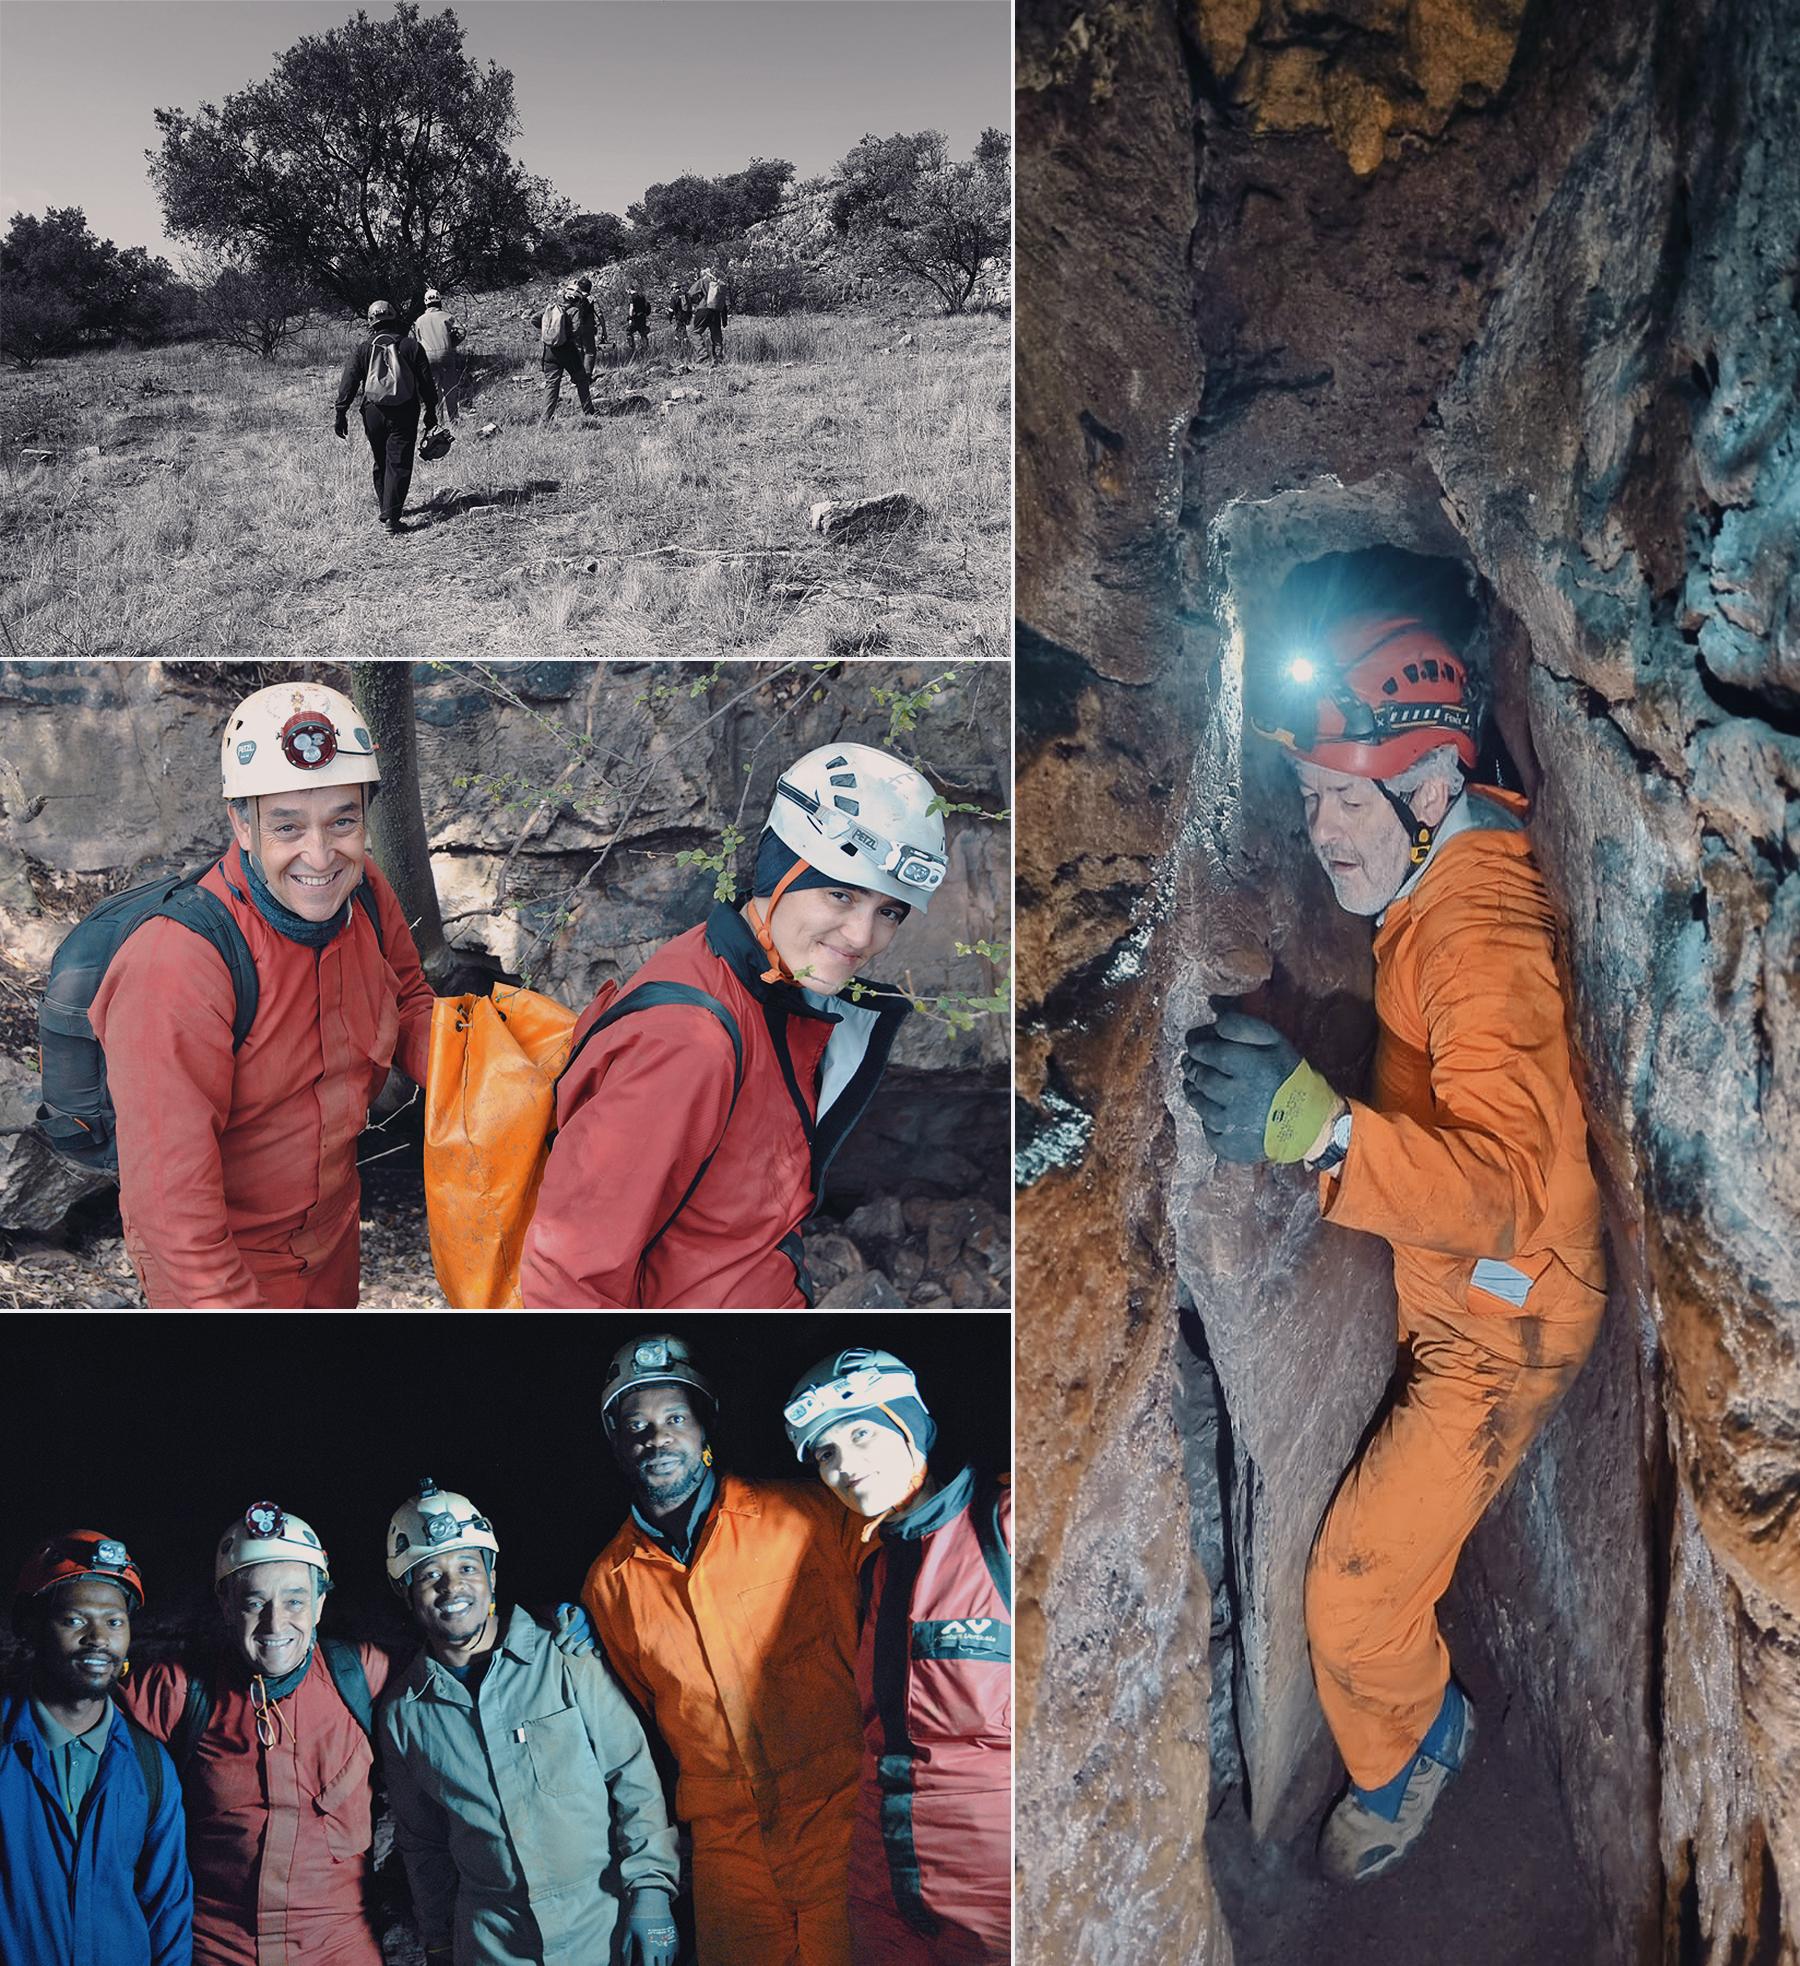 The First Art team approaching and descending into the Rising Star Cave system, South Africa Rock Art Bradshaw Foundation